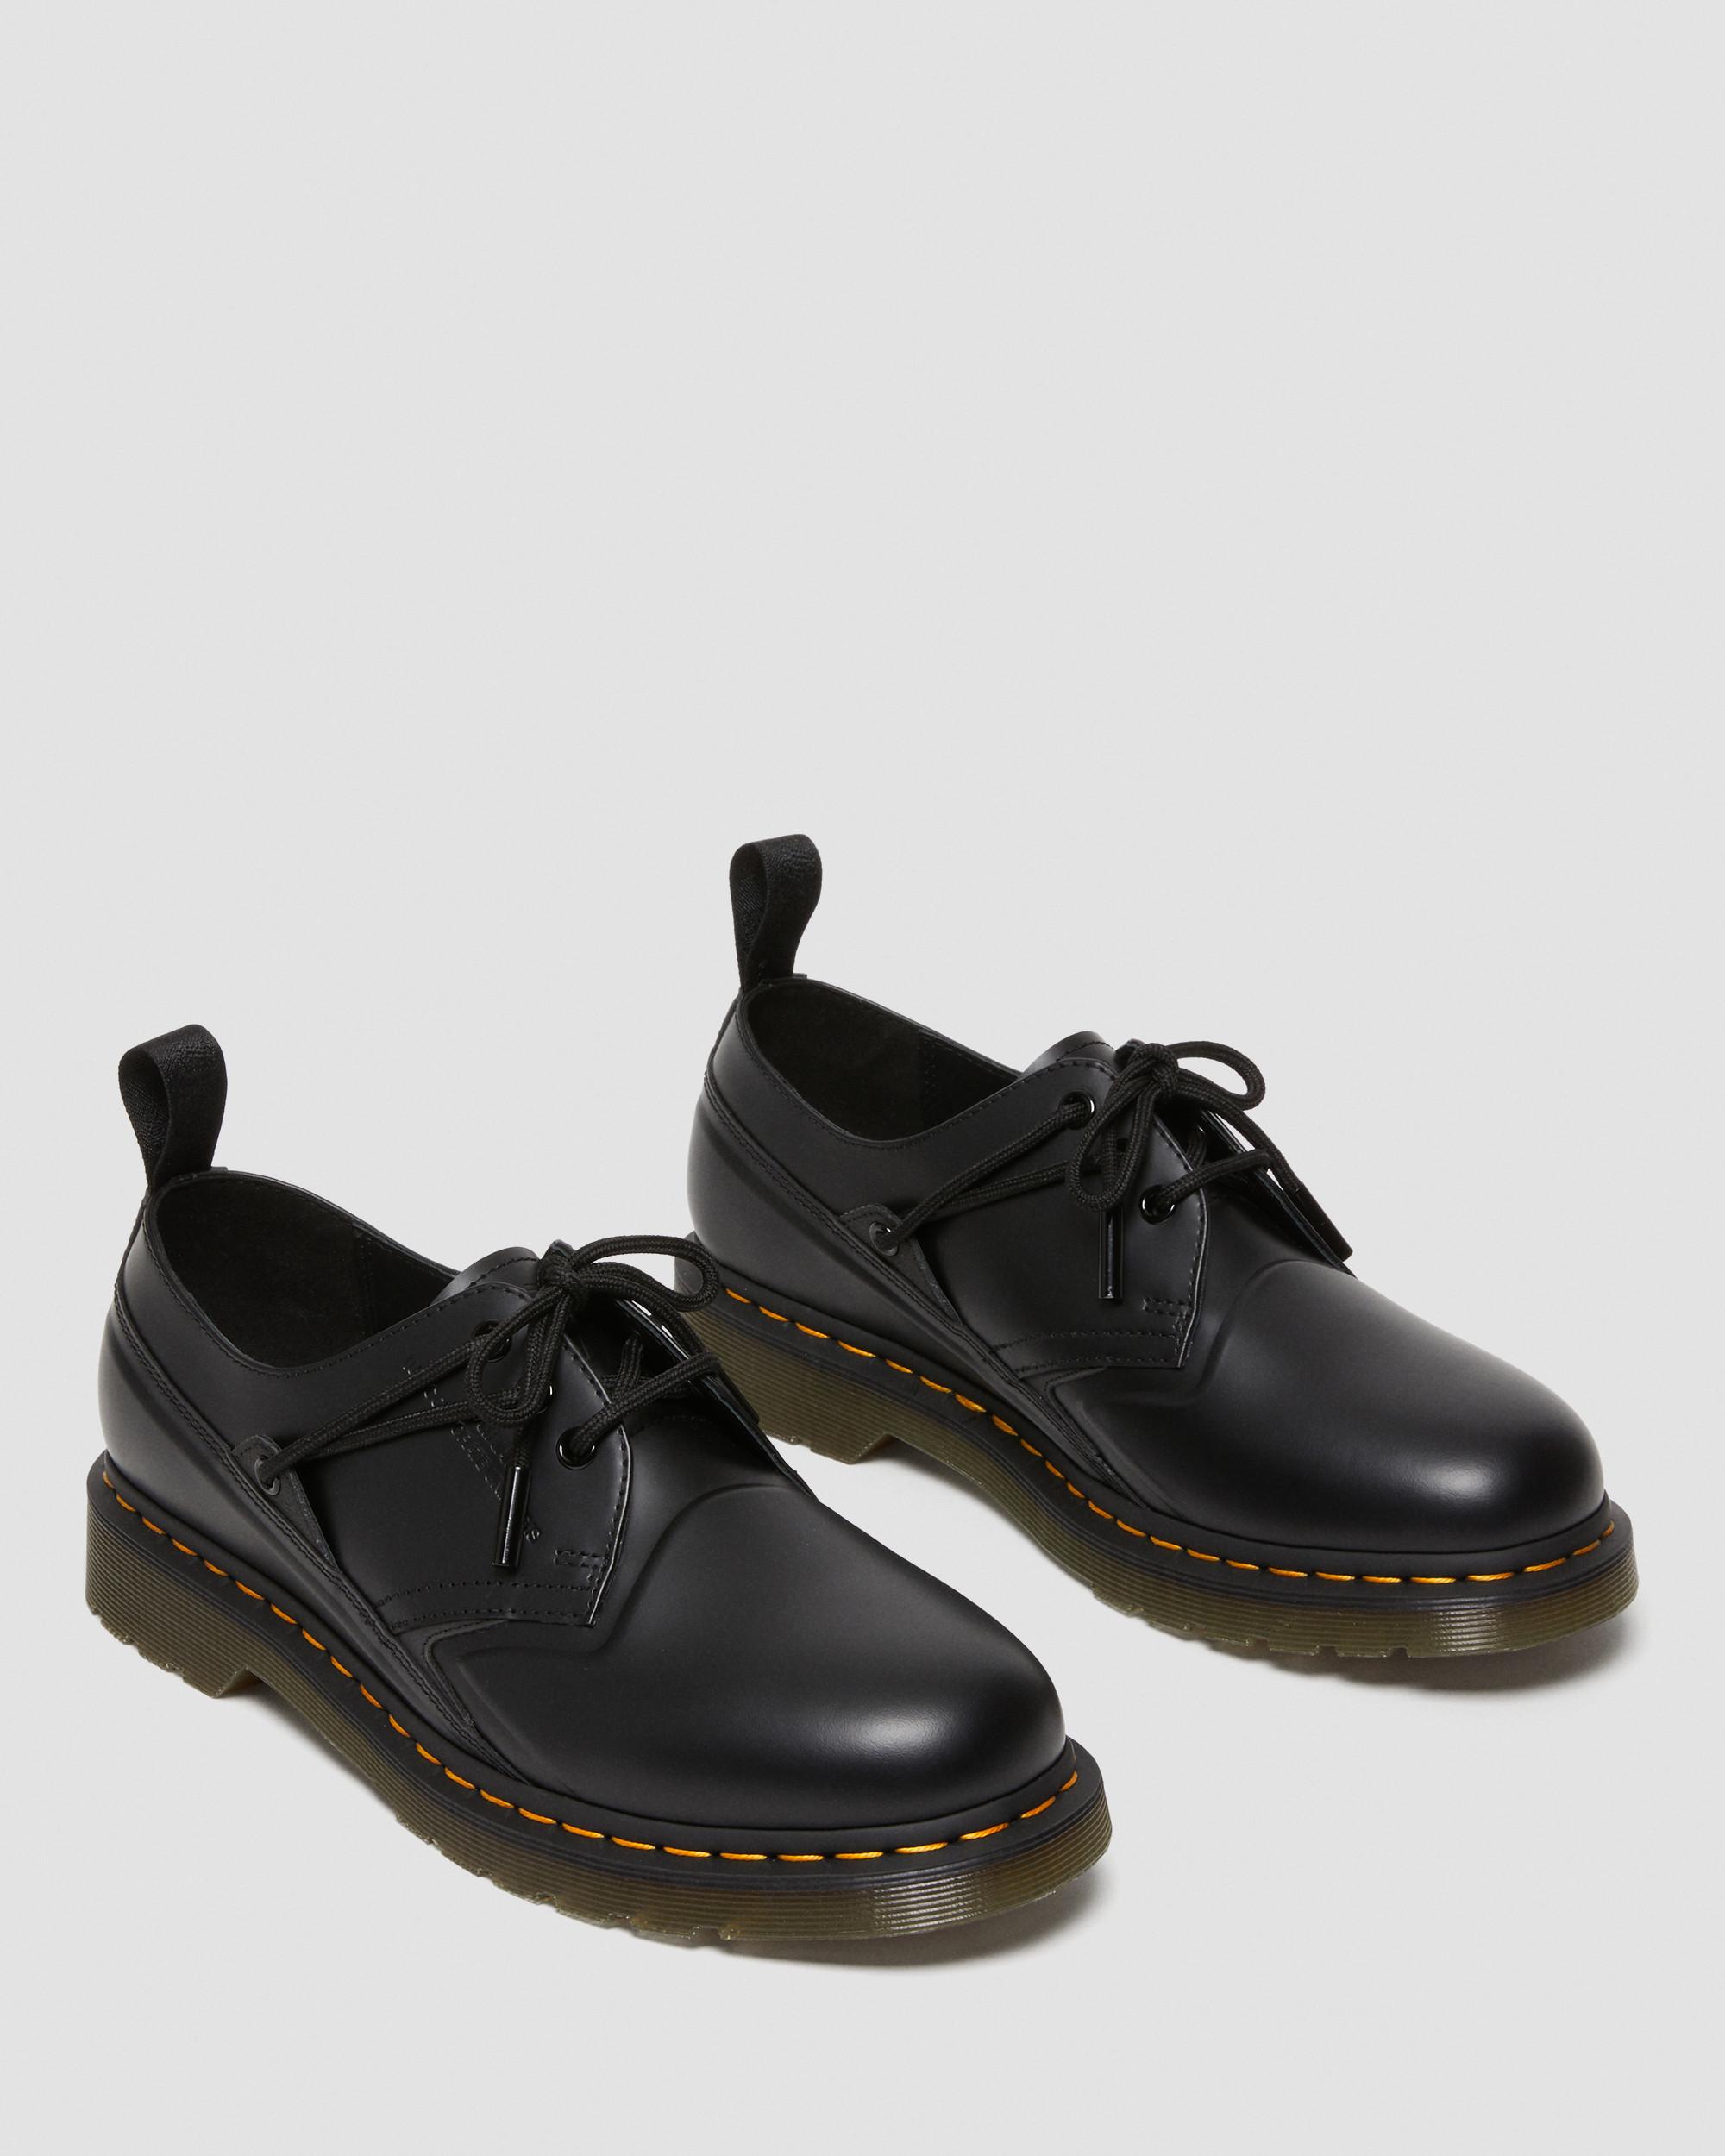 1461 Slam Jam Smooth Leather Shoes in Black